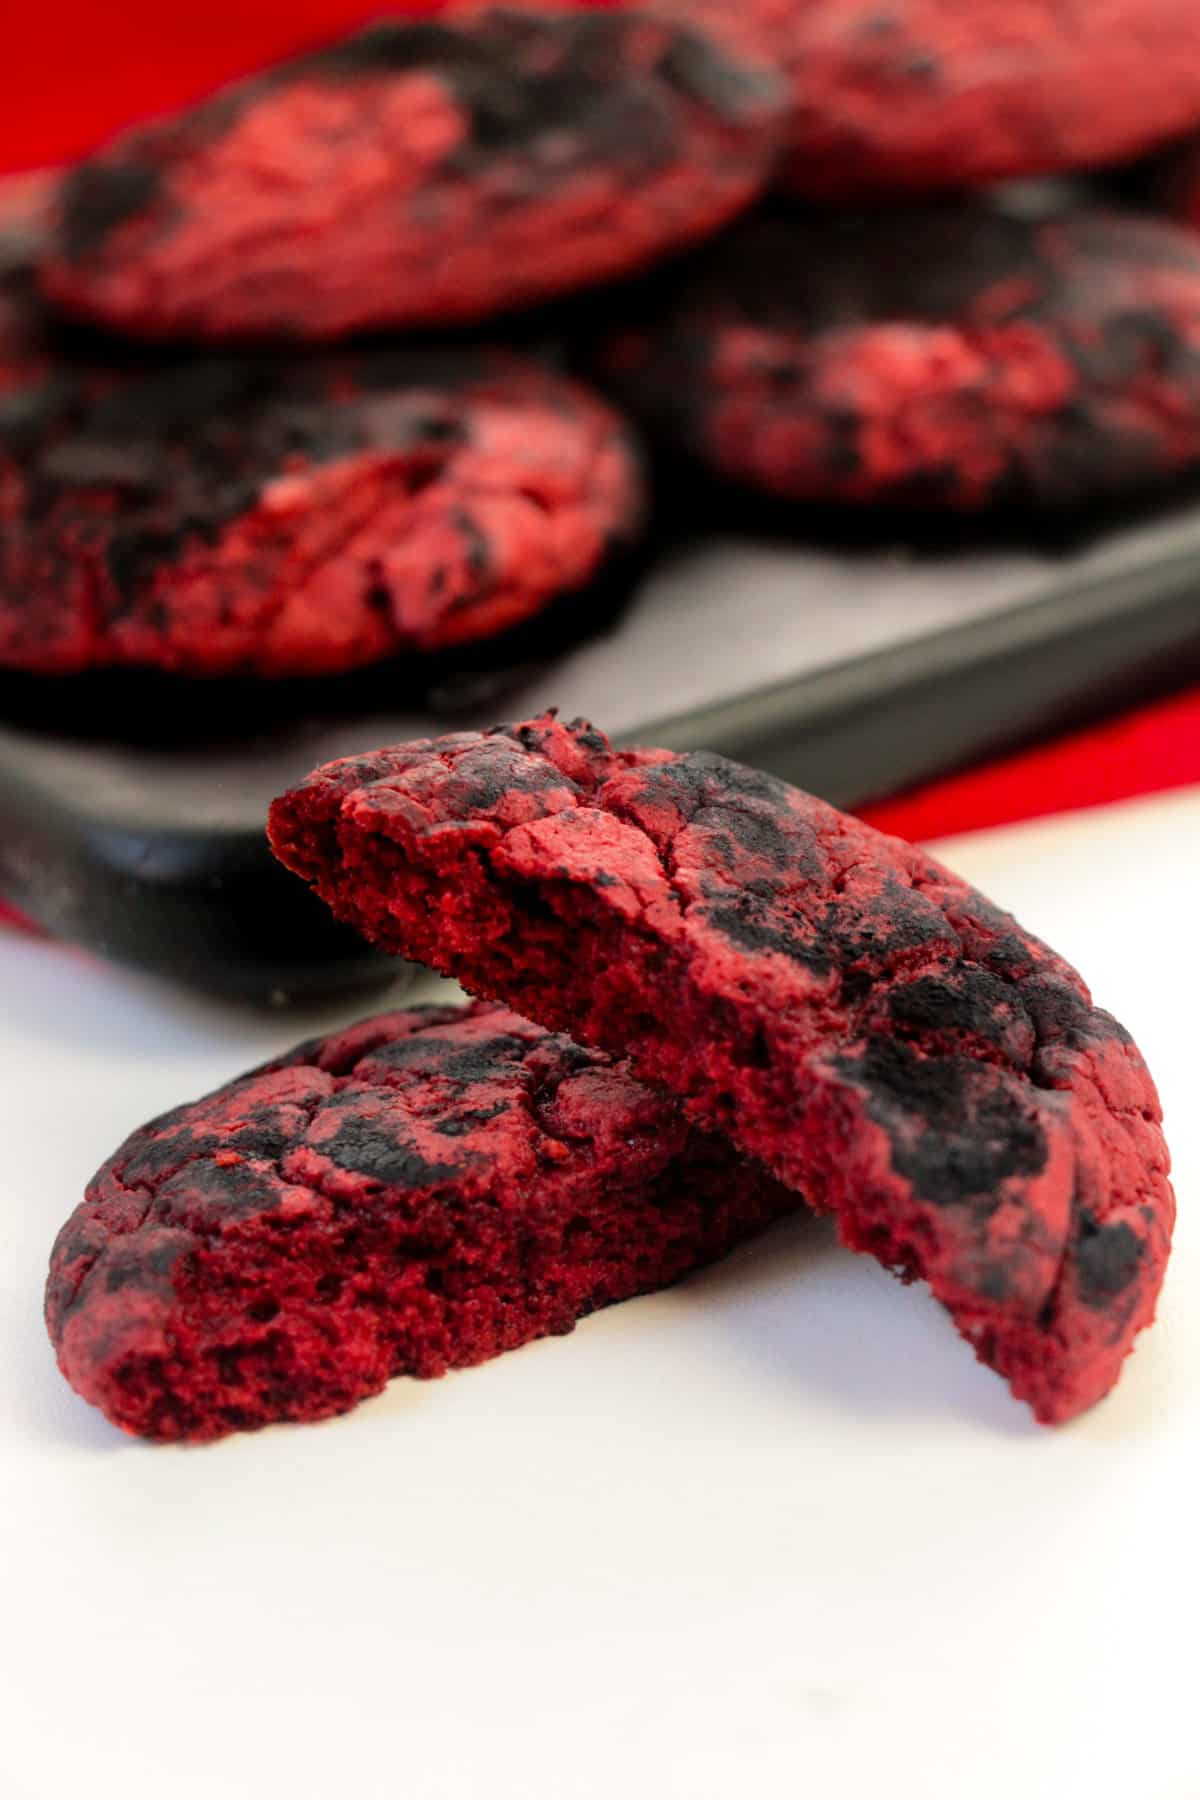 Red and black crinkle cookies on a wooden platter with one cookie broken in half to show red interior.